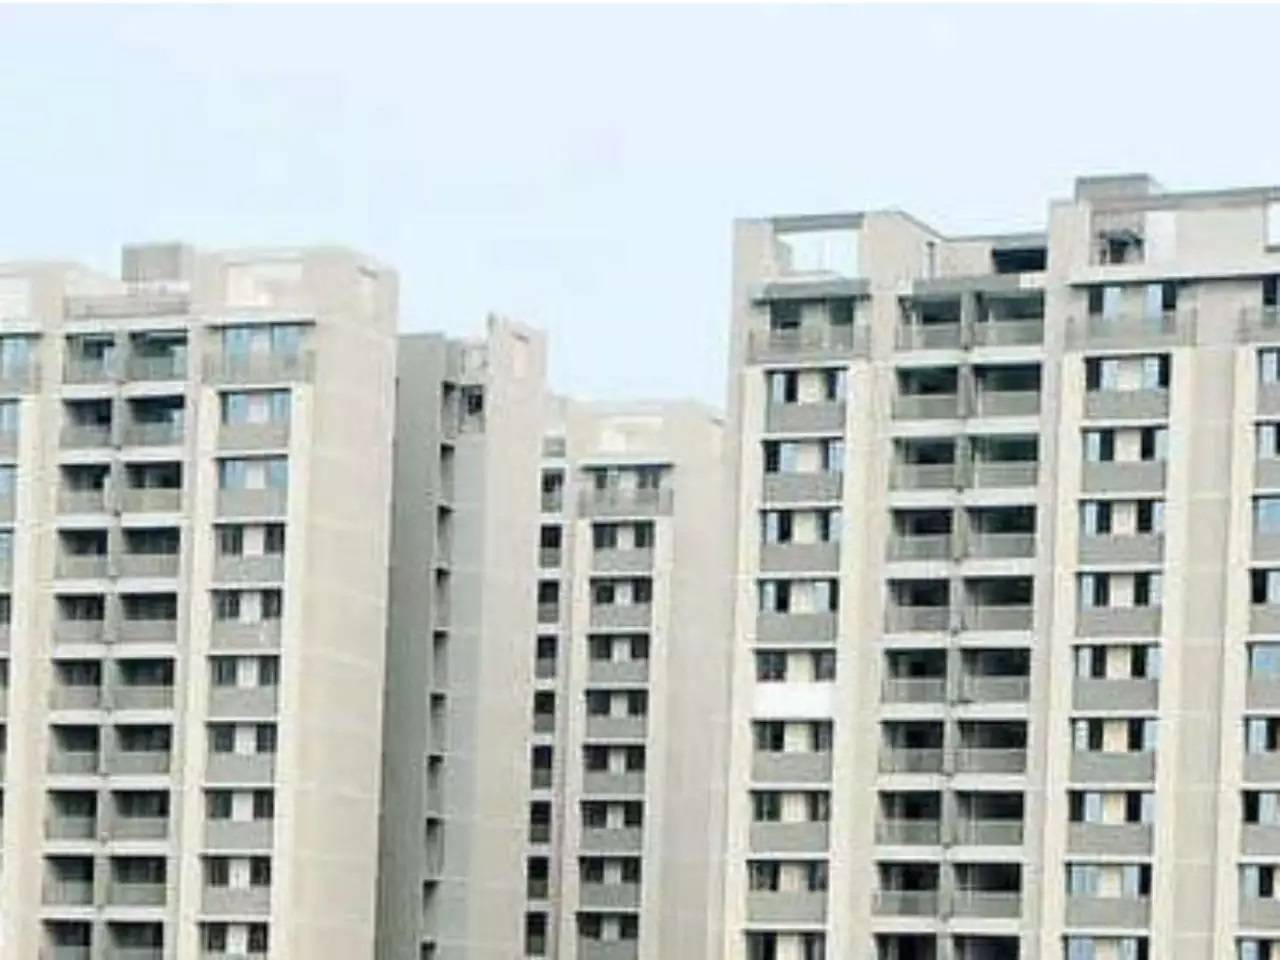 Urban Planning Centre's Rs 15,000-Crore Incentives Will Boost Realty Sector, Say Industry Players